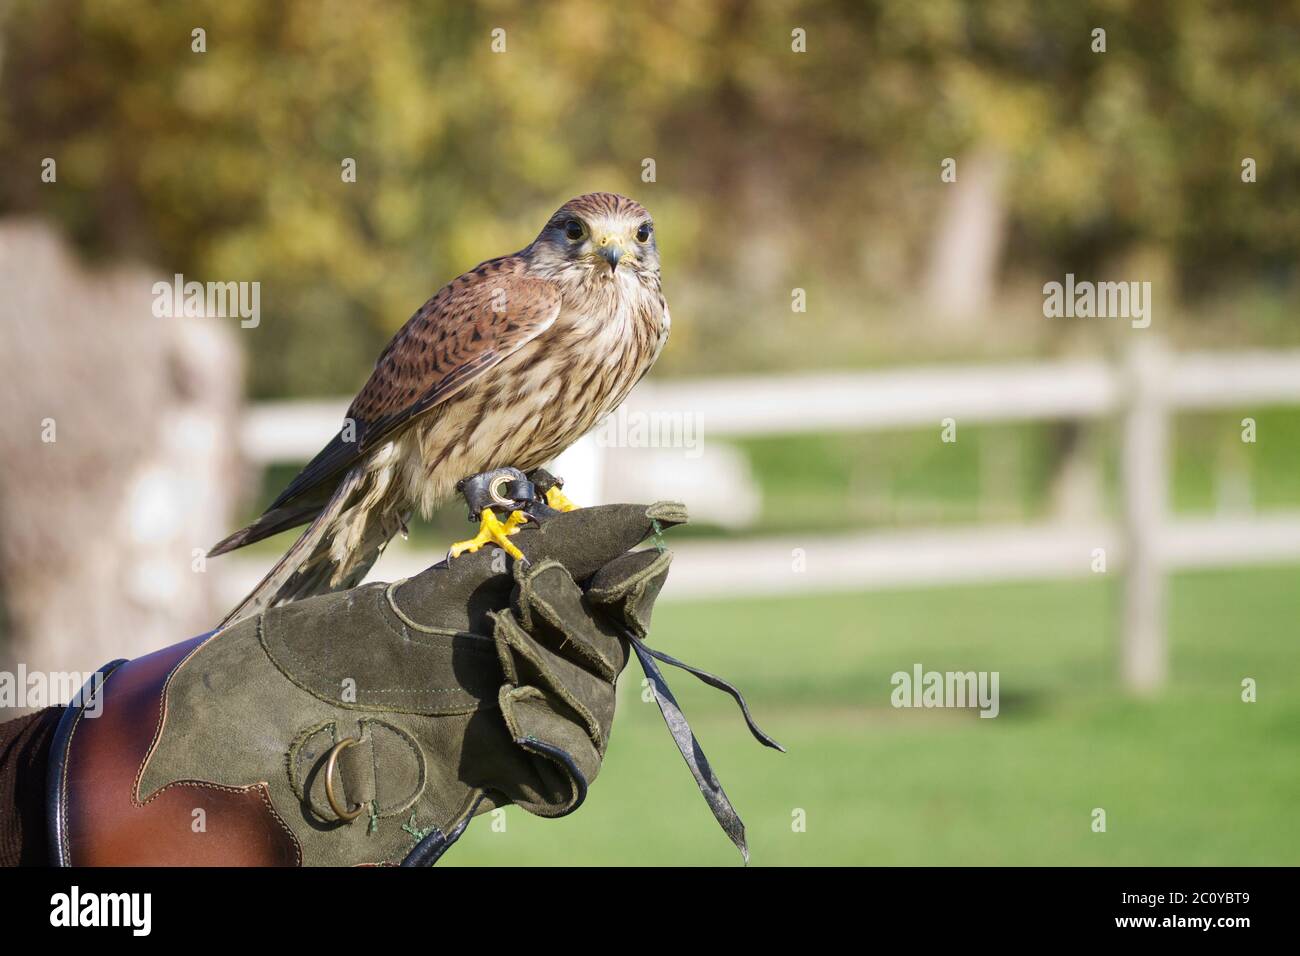 Trained hawk stands perched on the trainer's gloved hand. Stock Photo